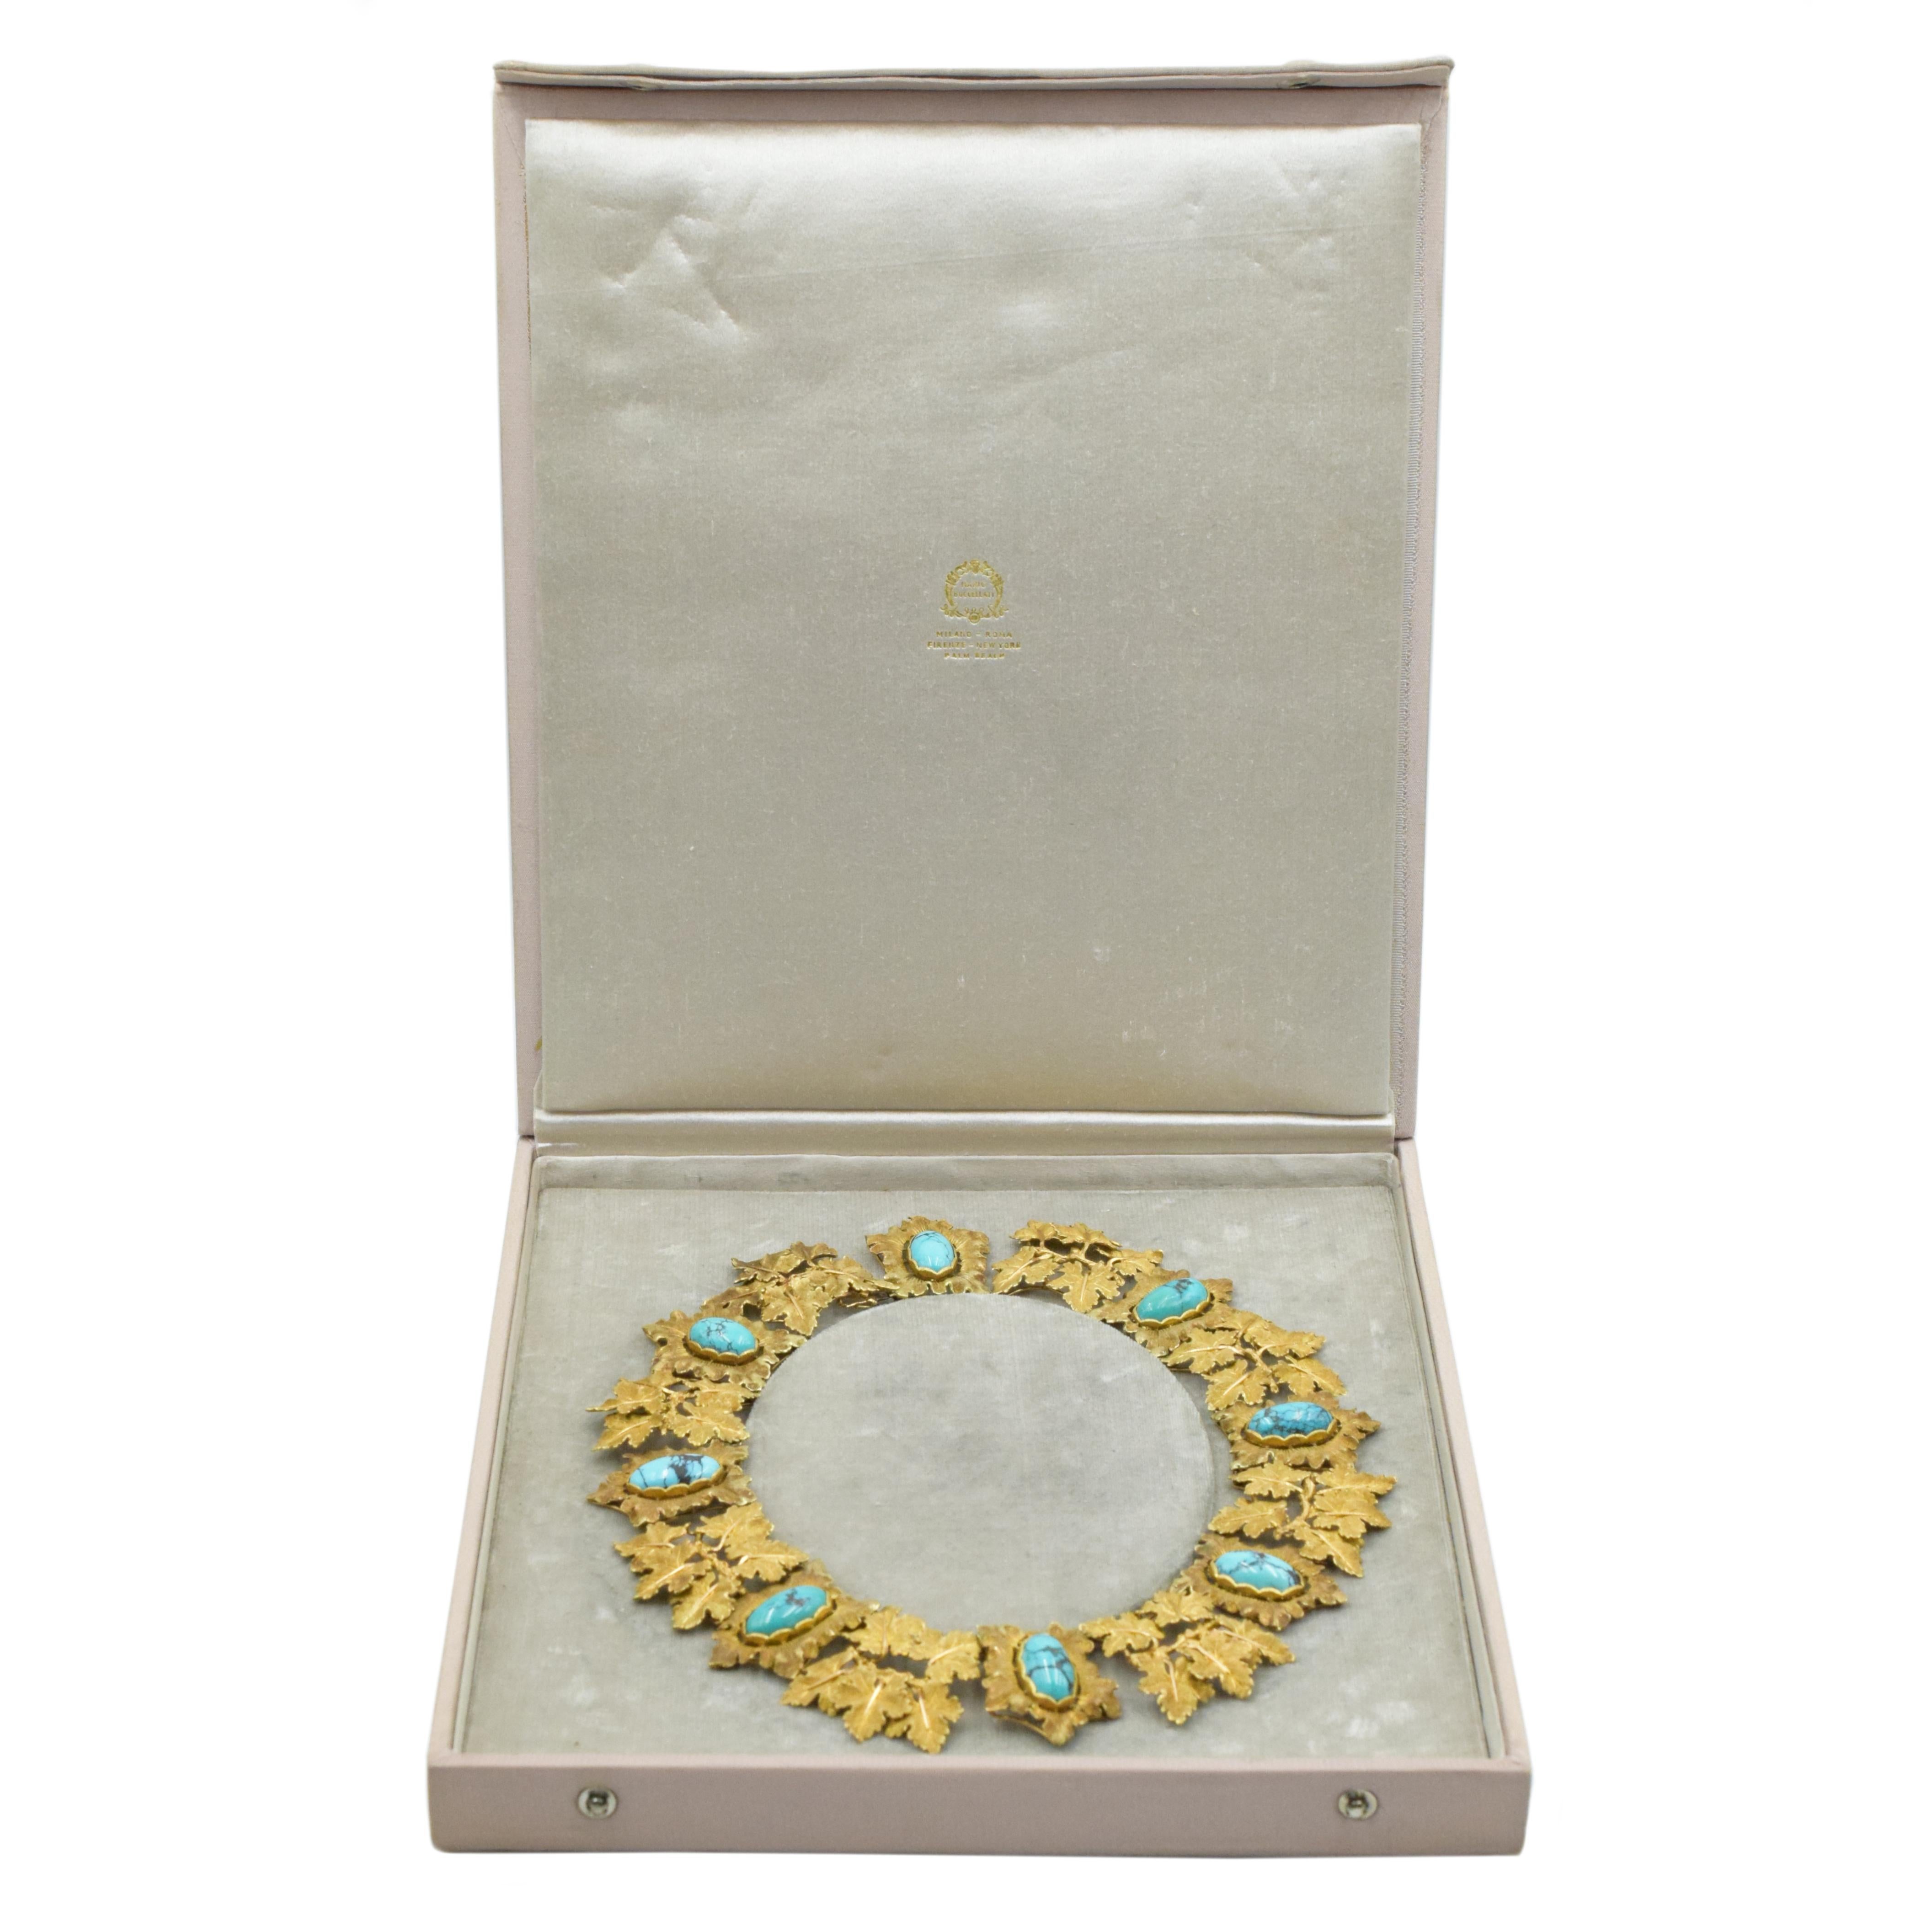 Mario Buccellati Gold and Turquoise Necklace  with wide links designed as clusters of textured leaves, spaced by eight oval matrix turquoise approximately  19.0 x 10.0 mm. to 15.5 x 9.8 mm., within textured leaves, Signed M. Buccellati, Made in